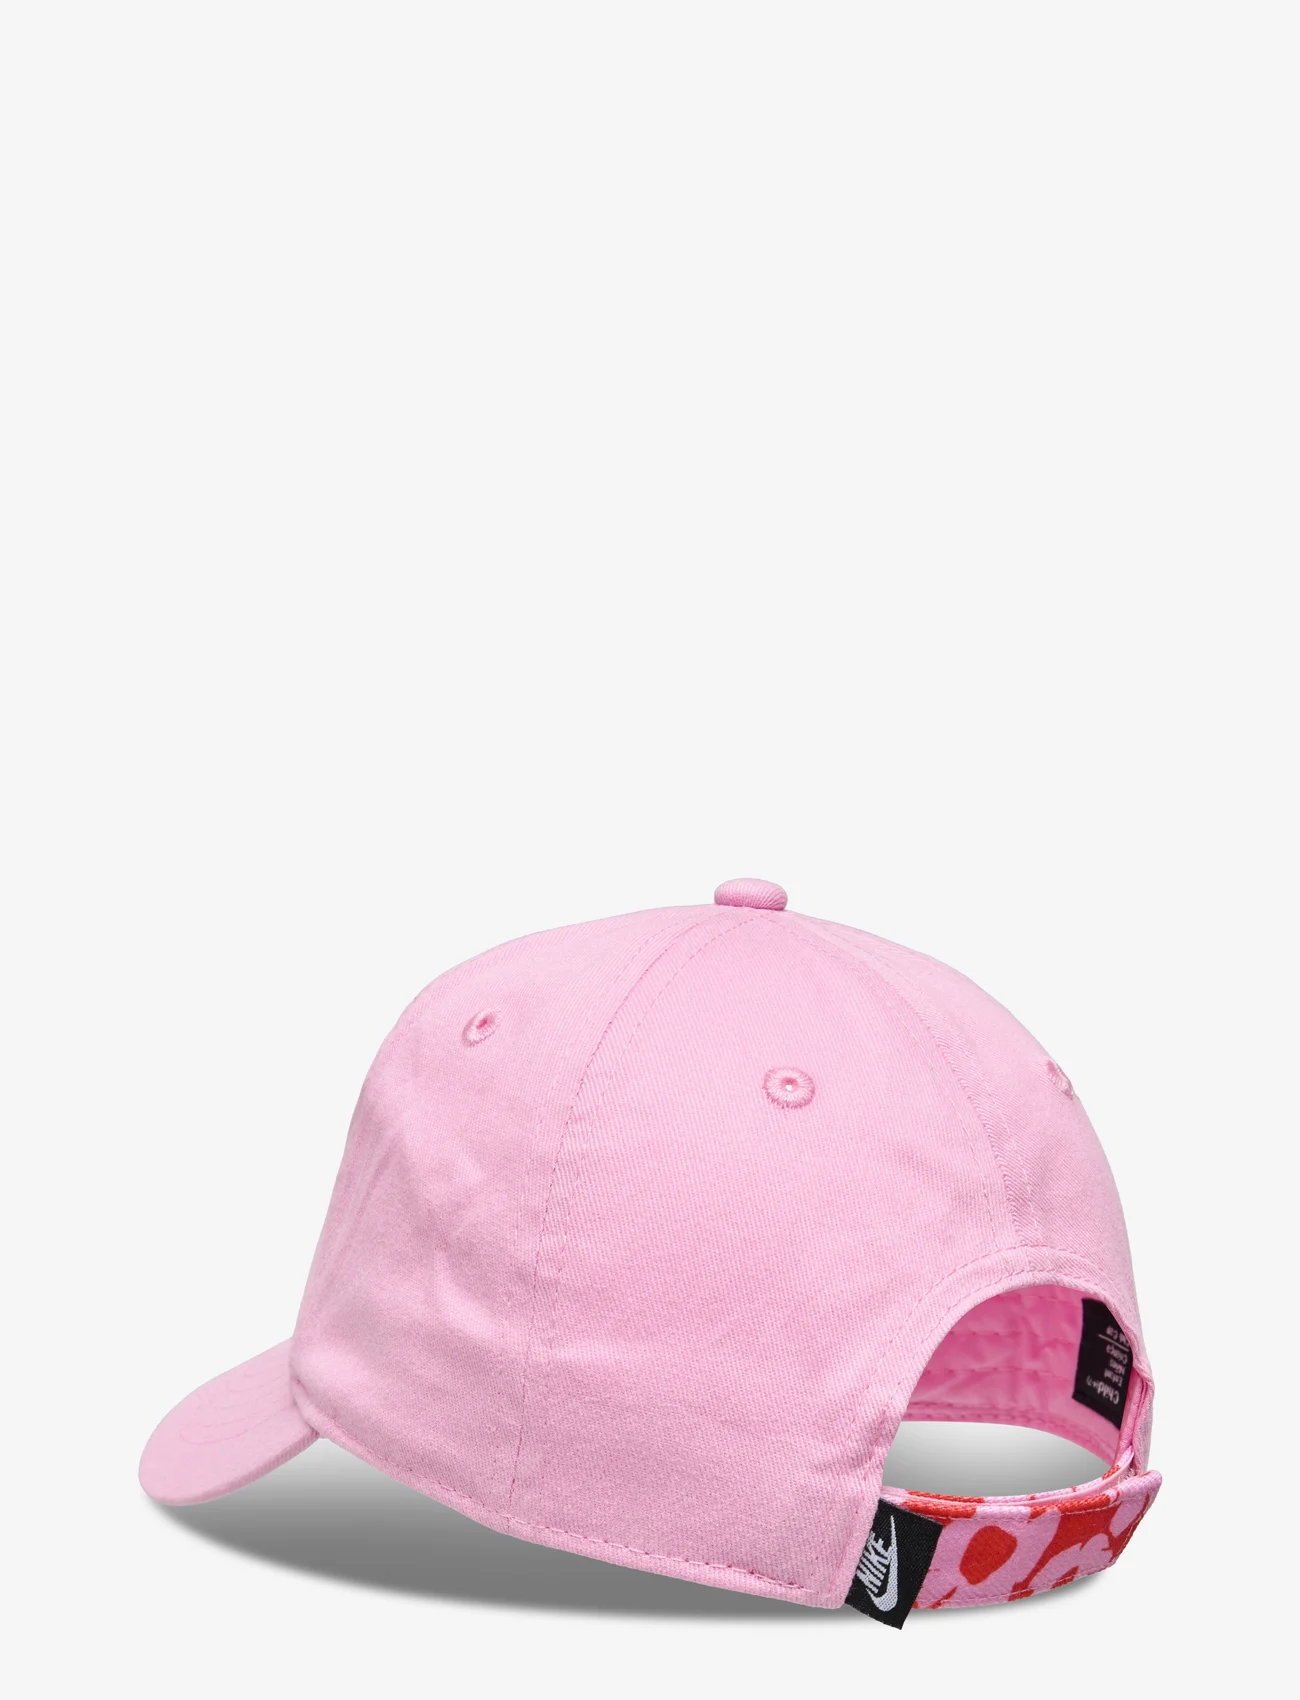 Nike - NAG YOUR MOVE CLUB CAP / NAG YOUR MOVE CLUB CAP - sommerschnäppchen - pink rise - 1